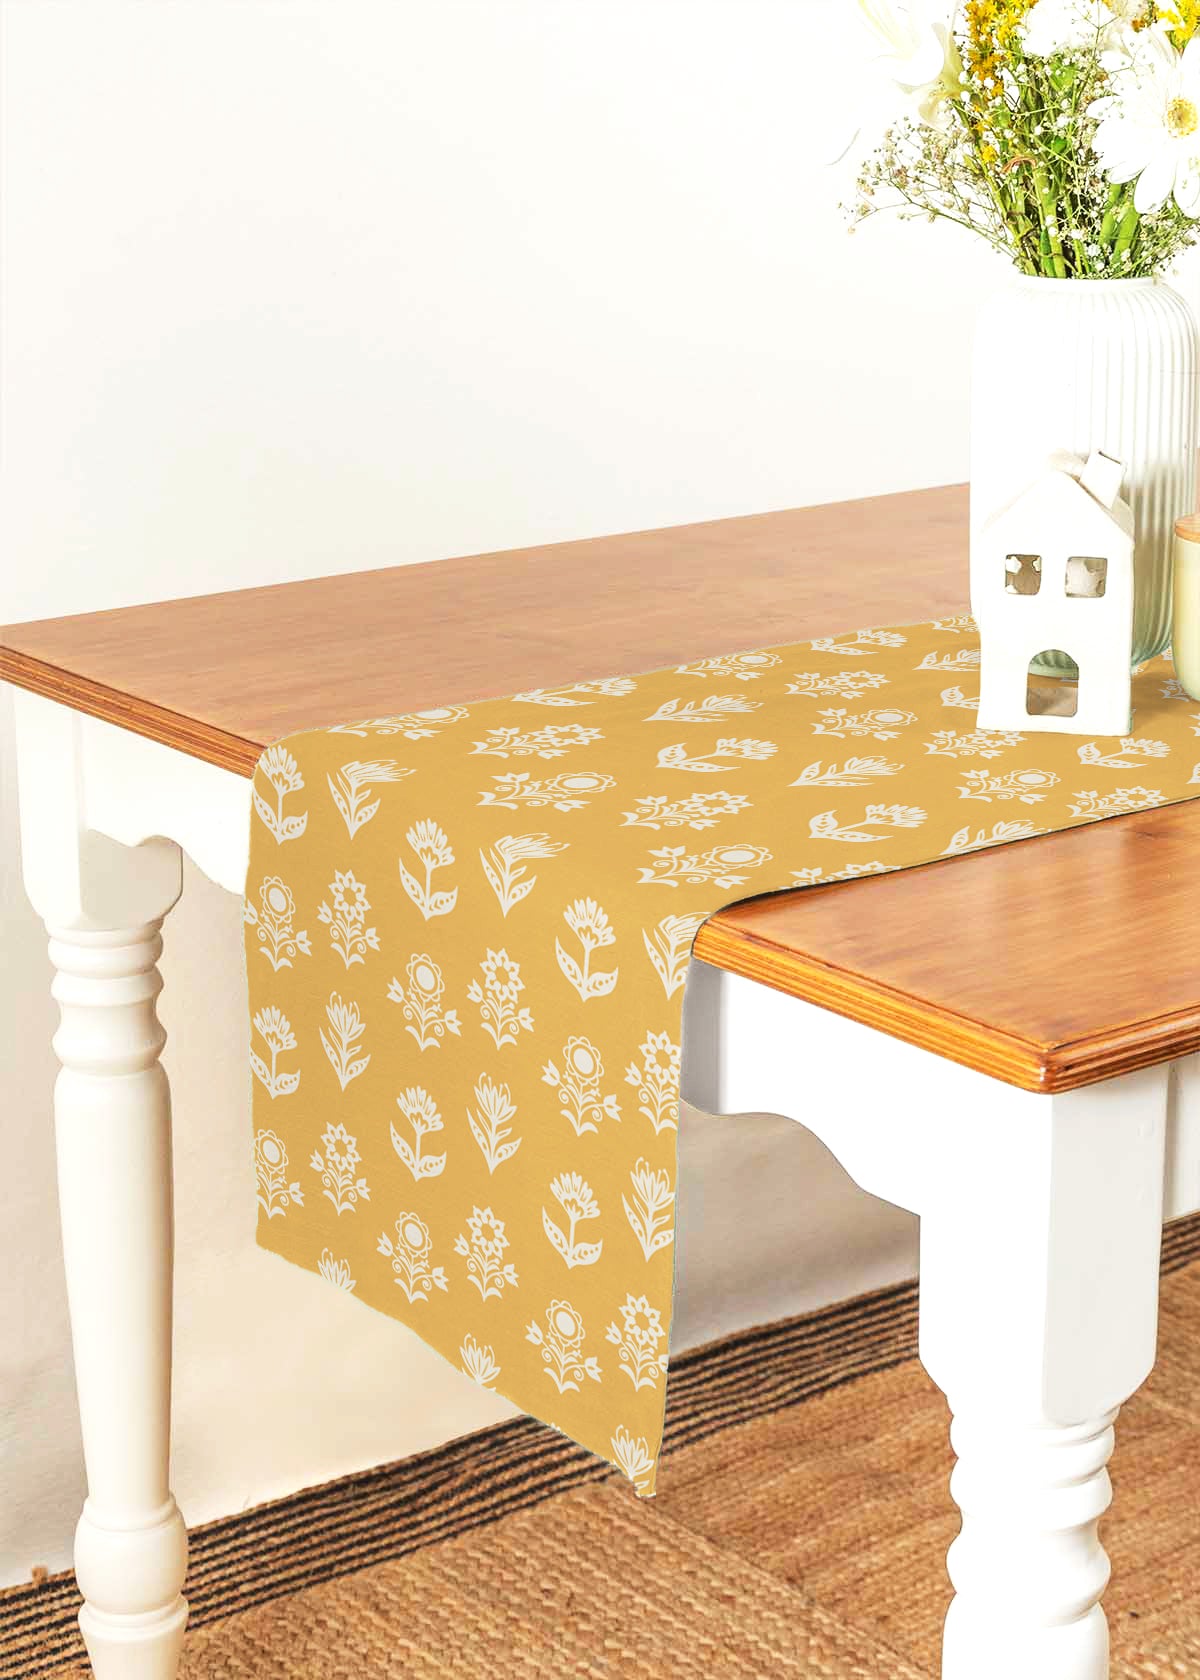 Dahlia 100% cotton floral table runner for 4 seater or 6 seater Dining with tassels - Mustard